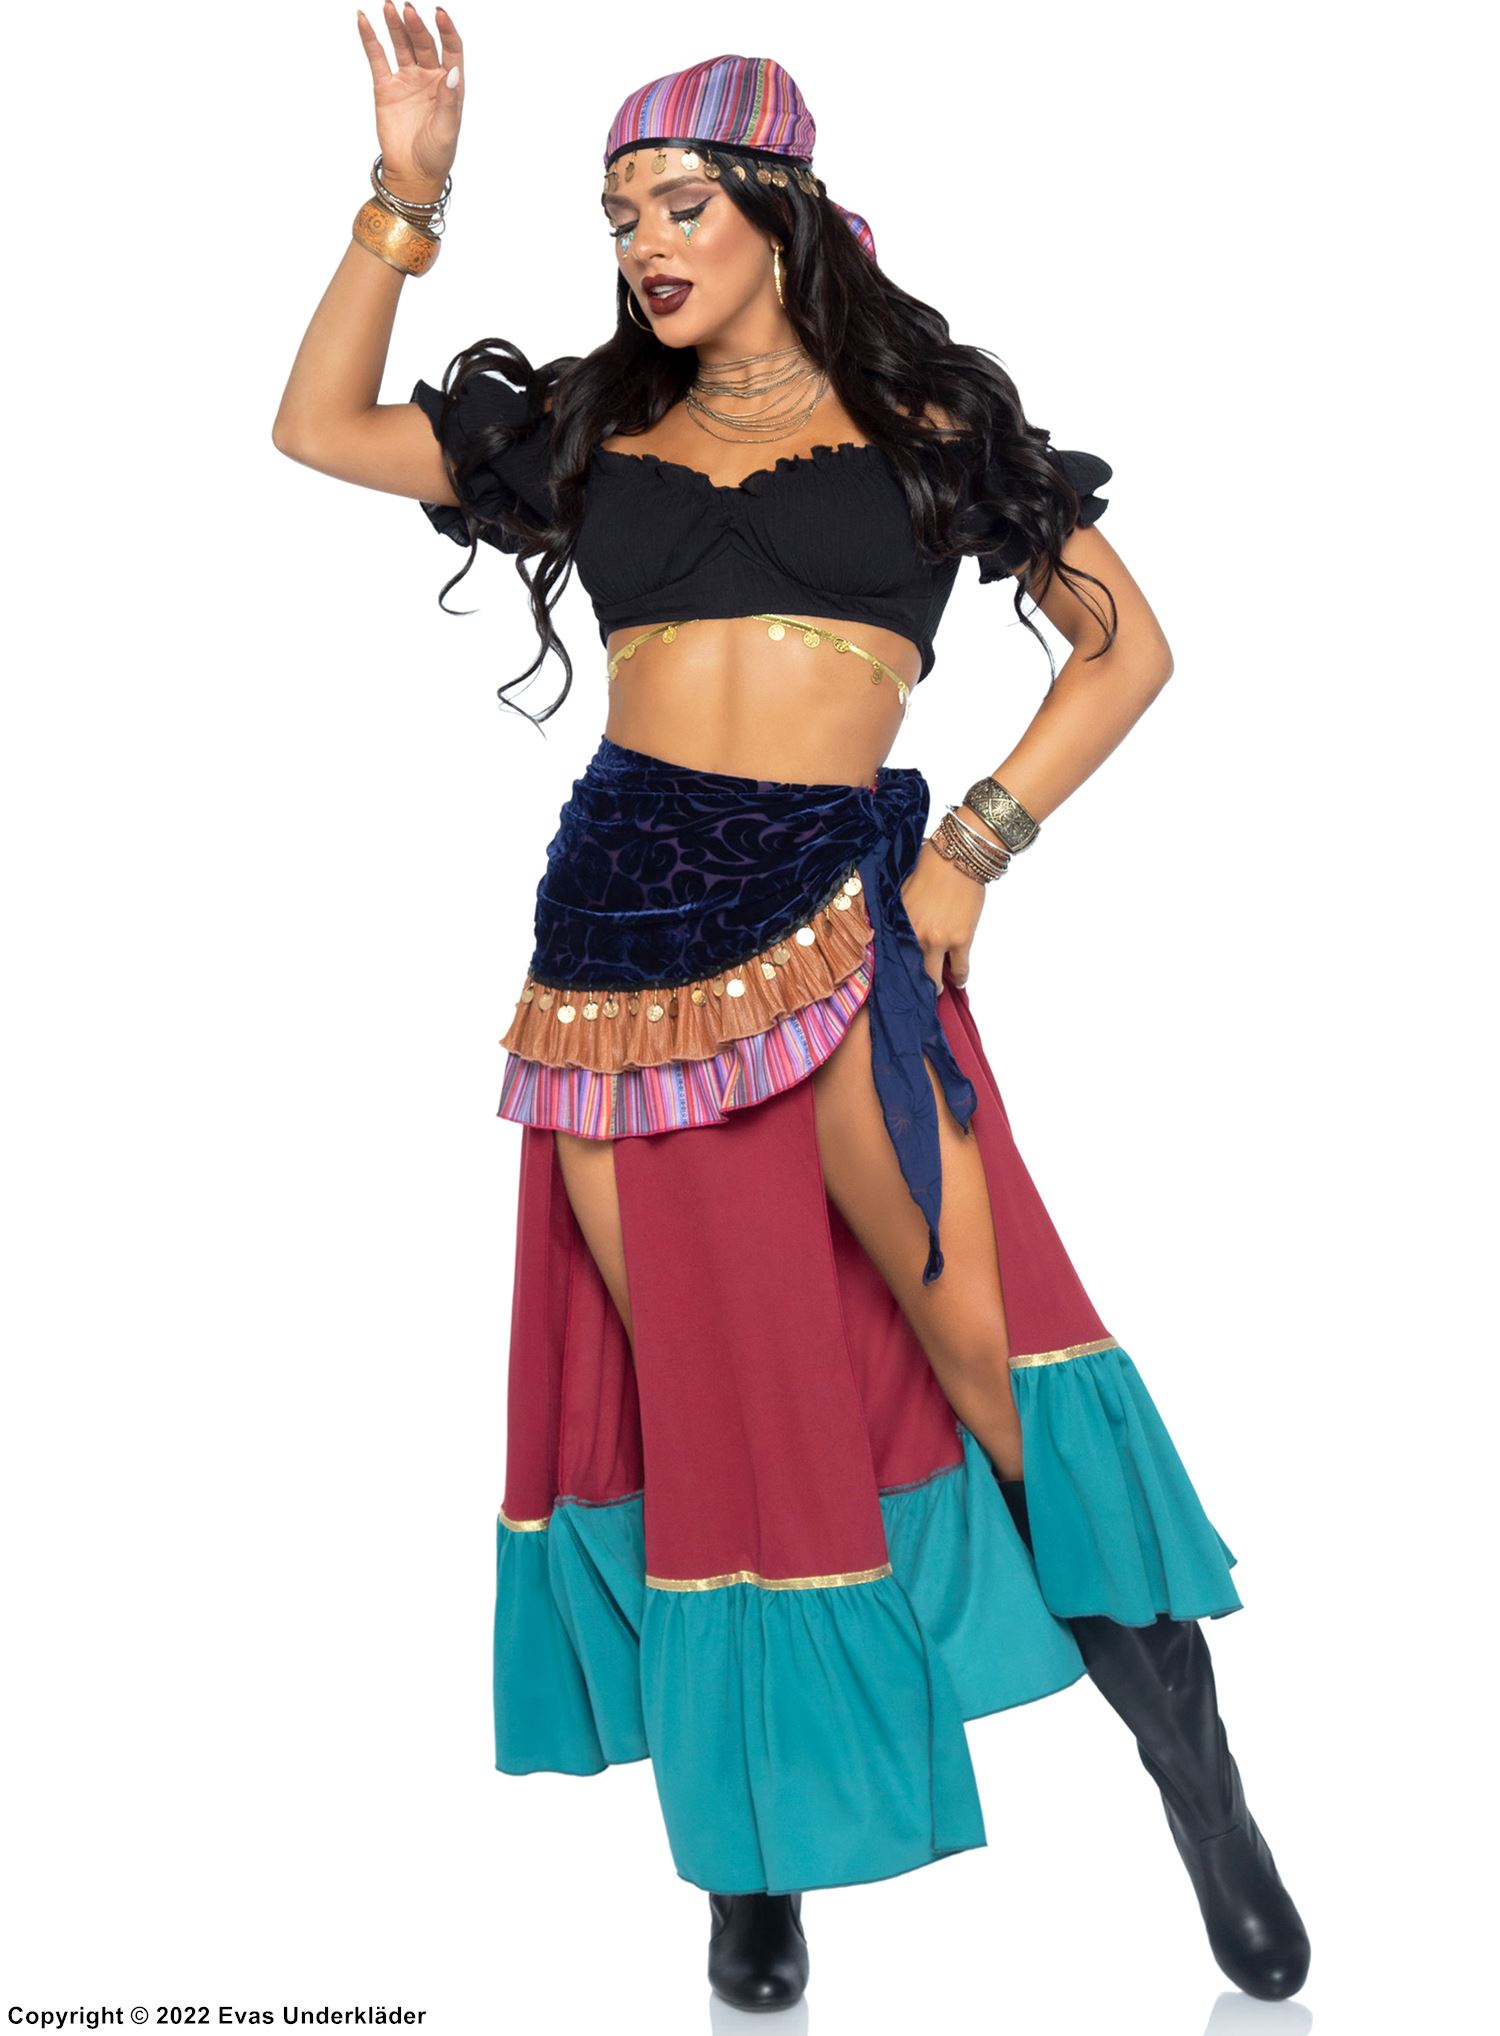 Gypsy princess, top and skirt costume, ruffle trim, high slit, off shoulder, coins